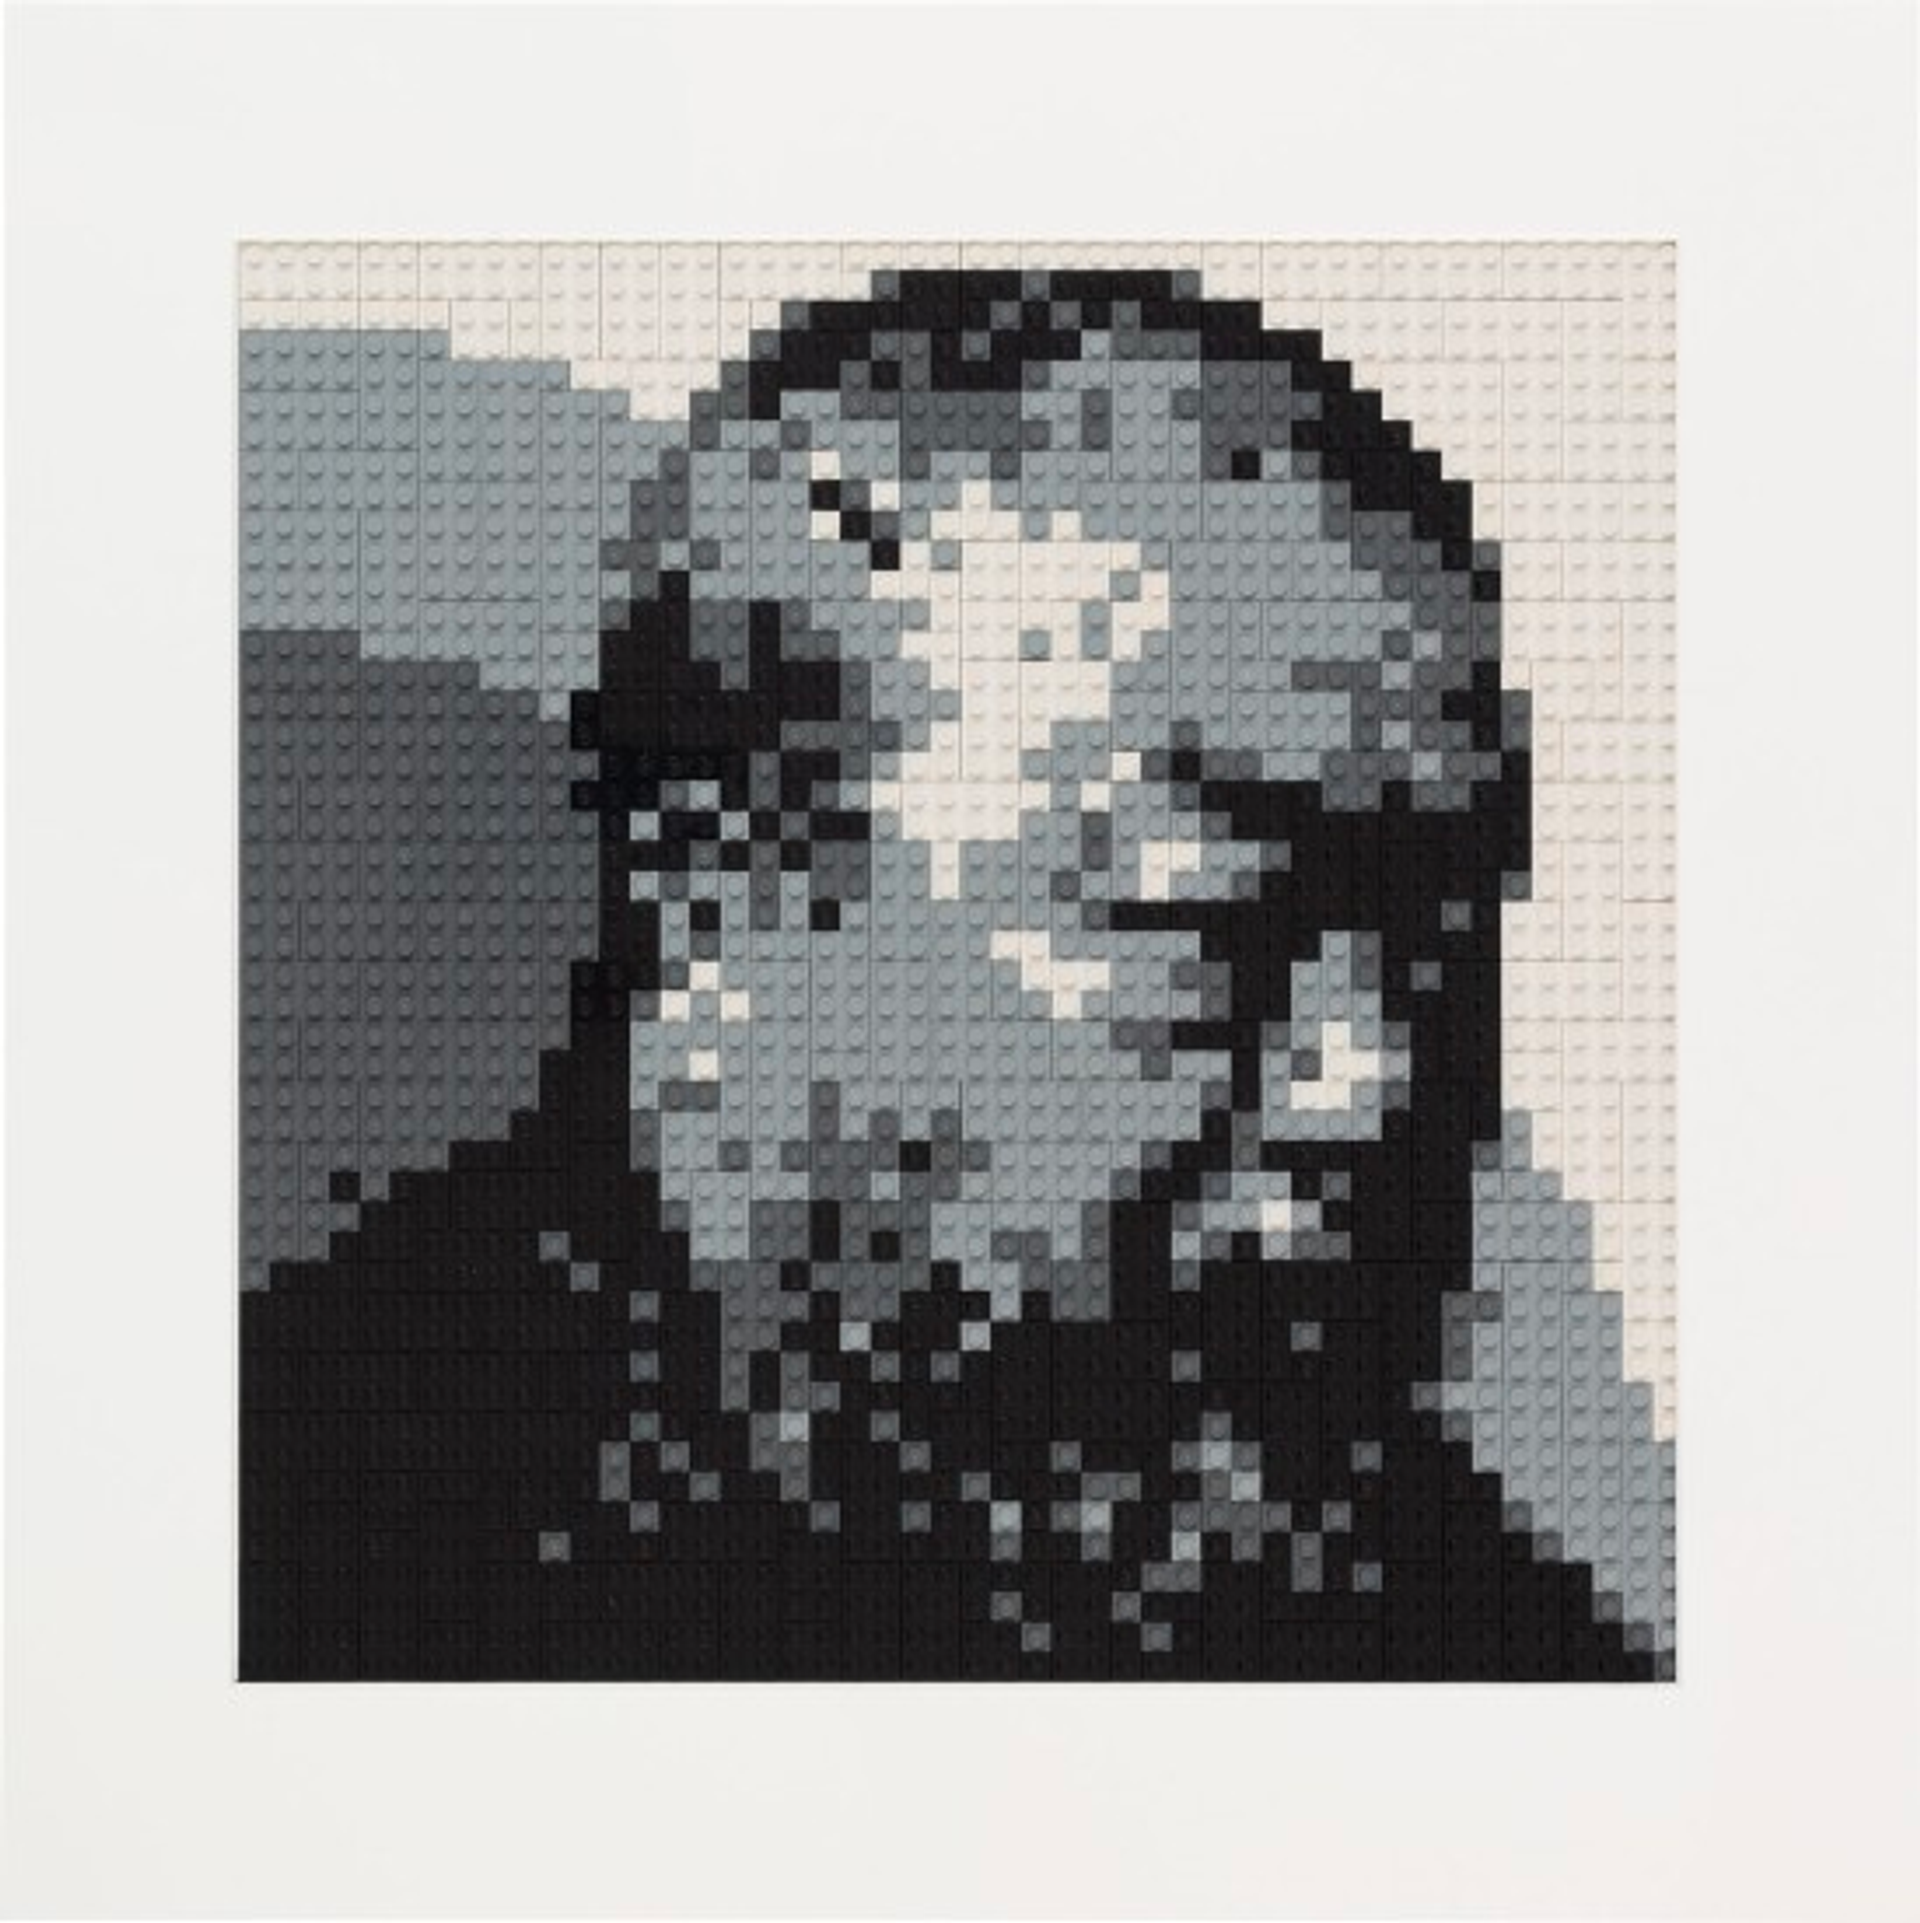 Self-Portrait in Lego by Ai Weiwei (2017). A portrait of artist Ai Weiwei from a side profile, made out of lego